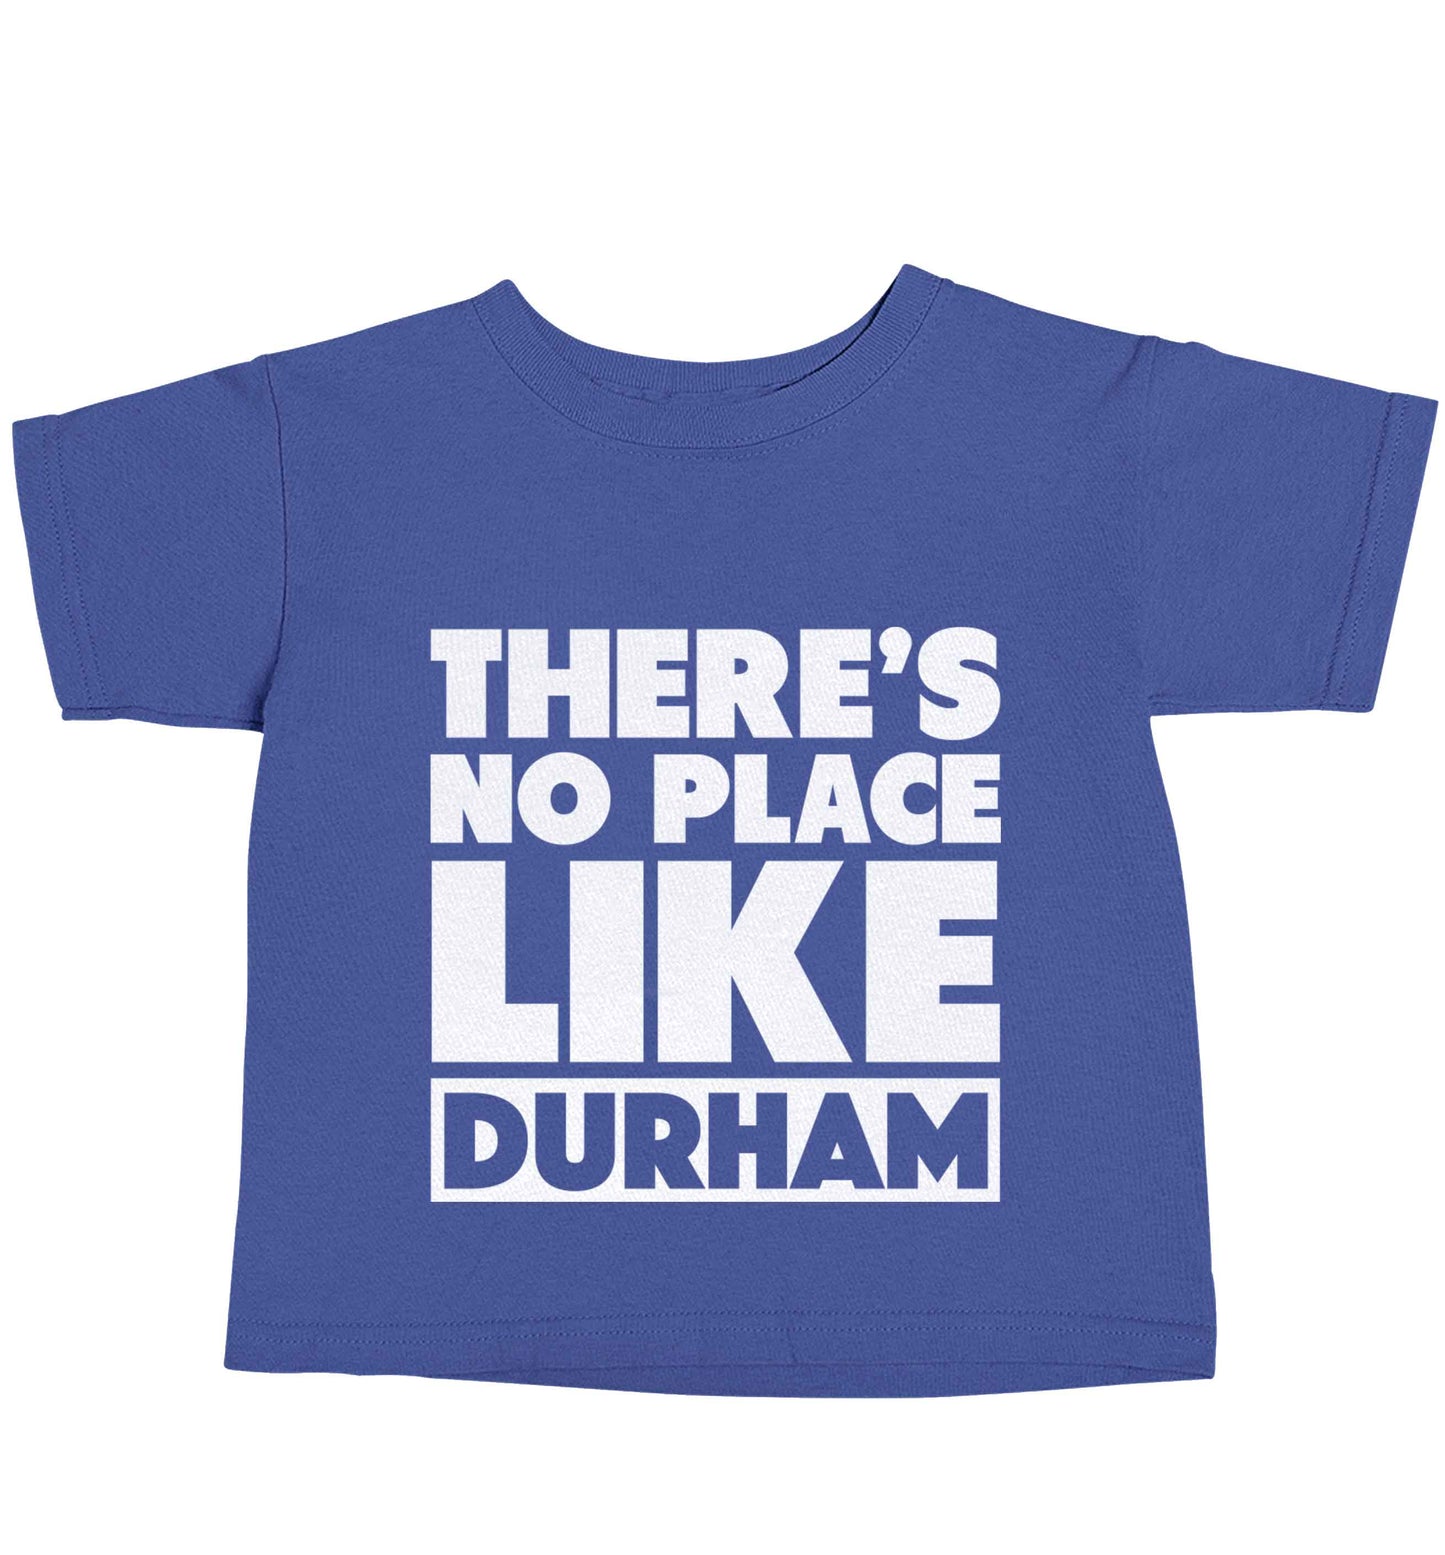 There's no place like Durham blue baby toddler Tshirt 2 Years